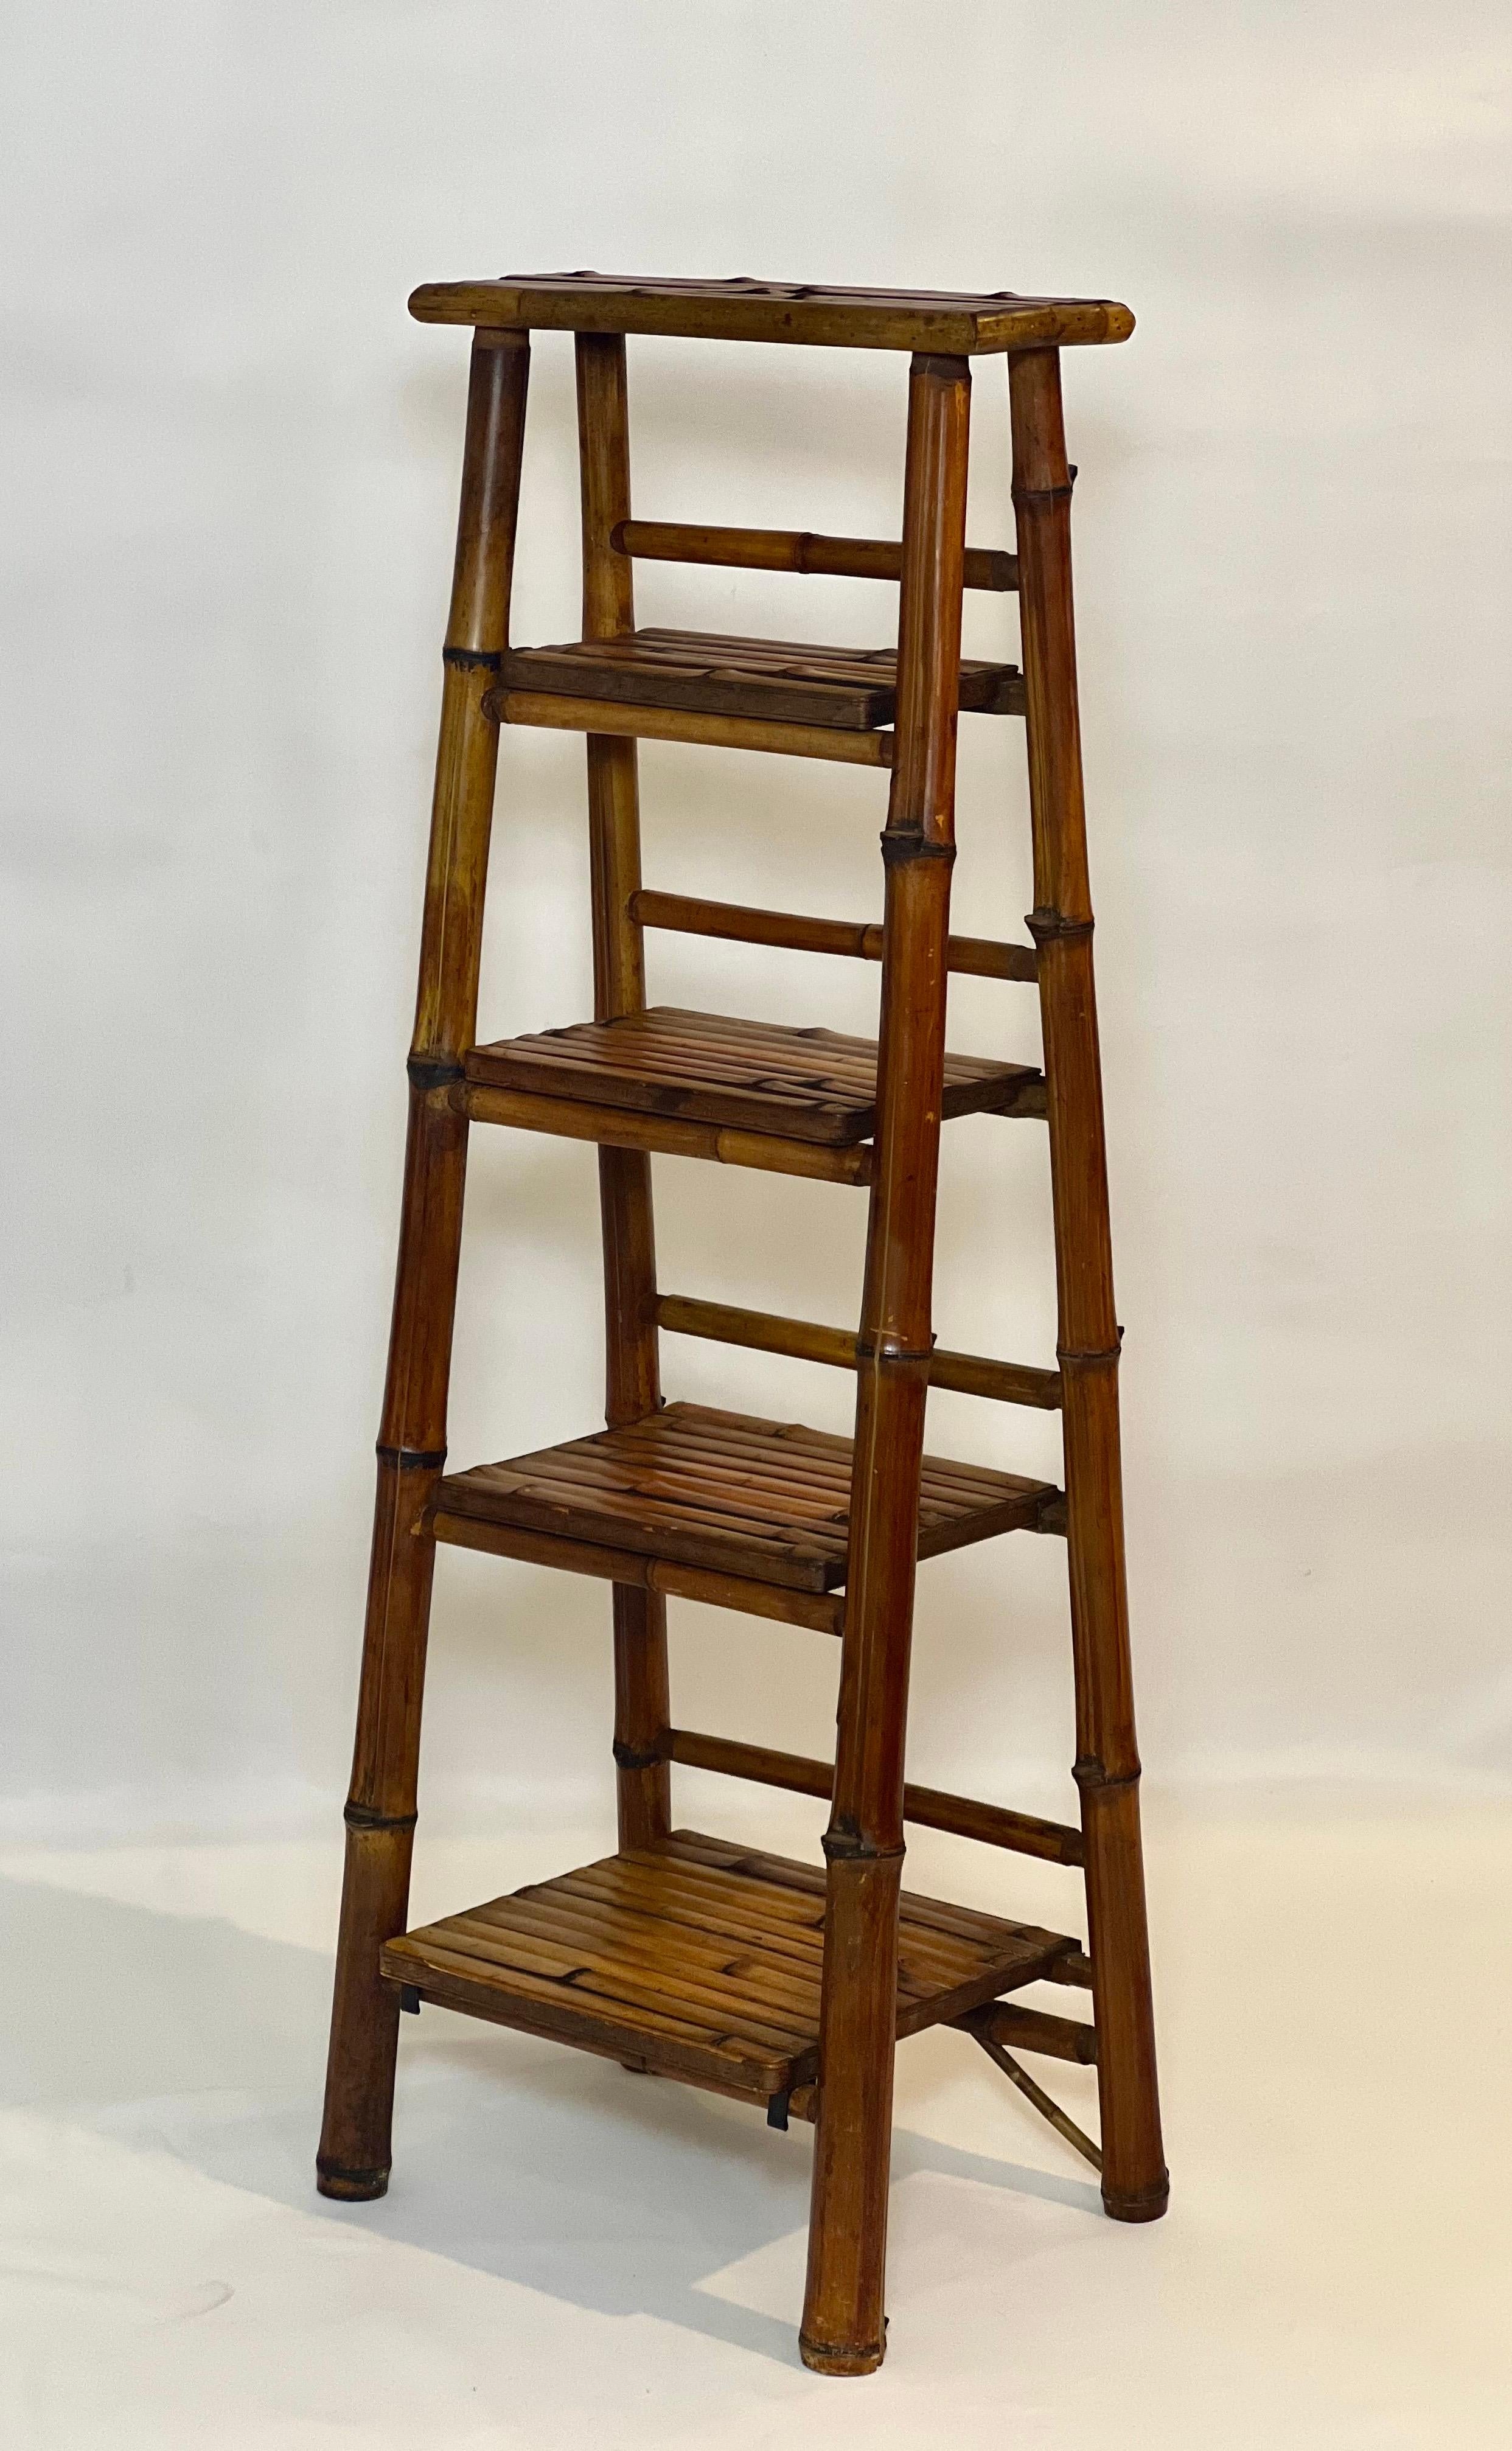 Vintage bamboo A-frame etagere or book stand, c. 1950s.

Slim and airy bamboo stand with five graduated tiers great for displaying plants, books, linens and photos. Its slender form allows it to fit in many spaces while adding nice height and